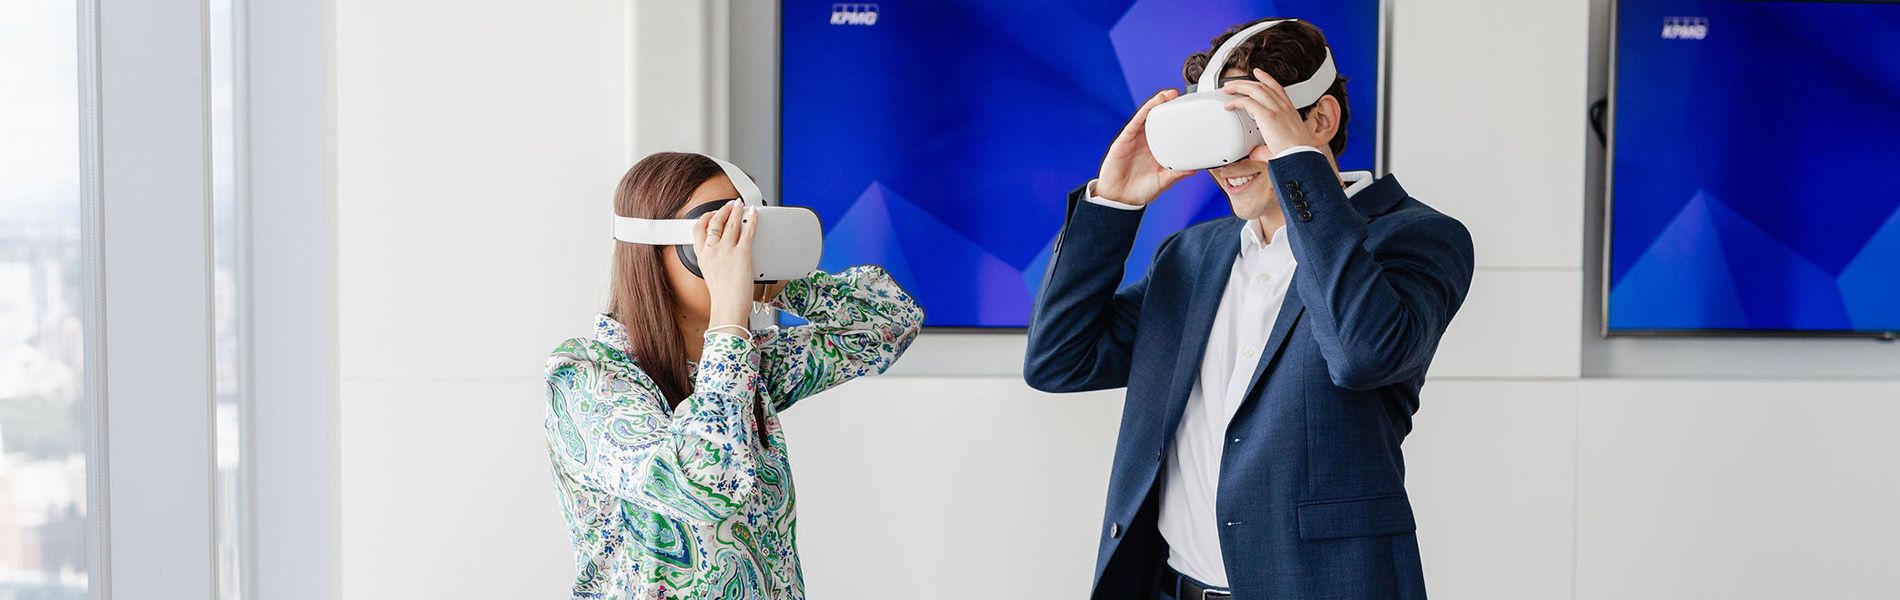 Business people looking at VR gear